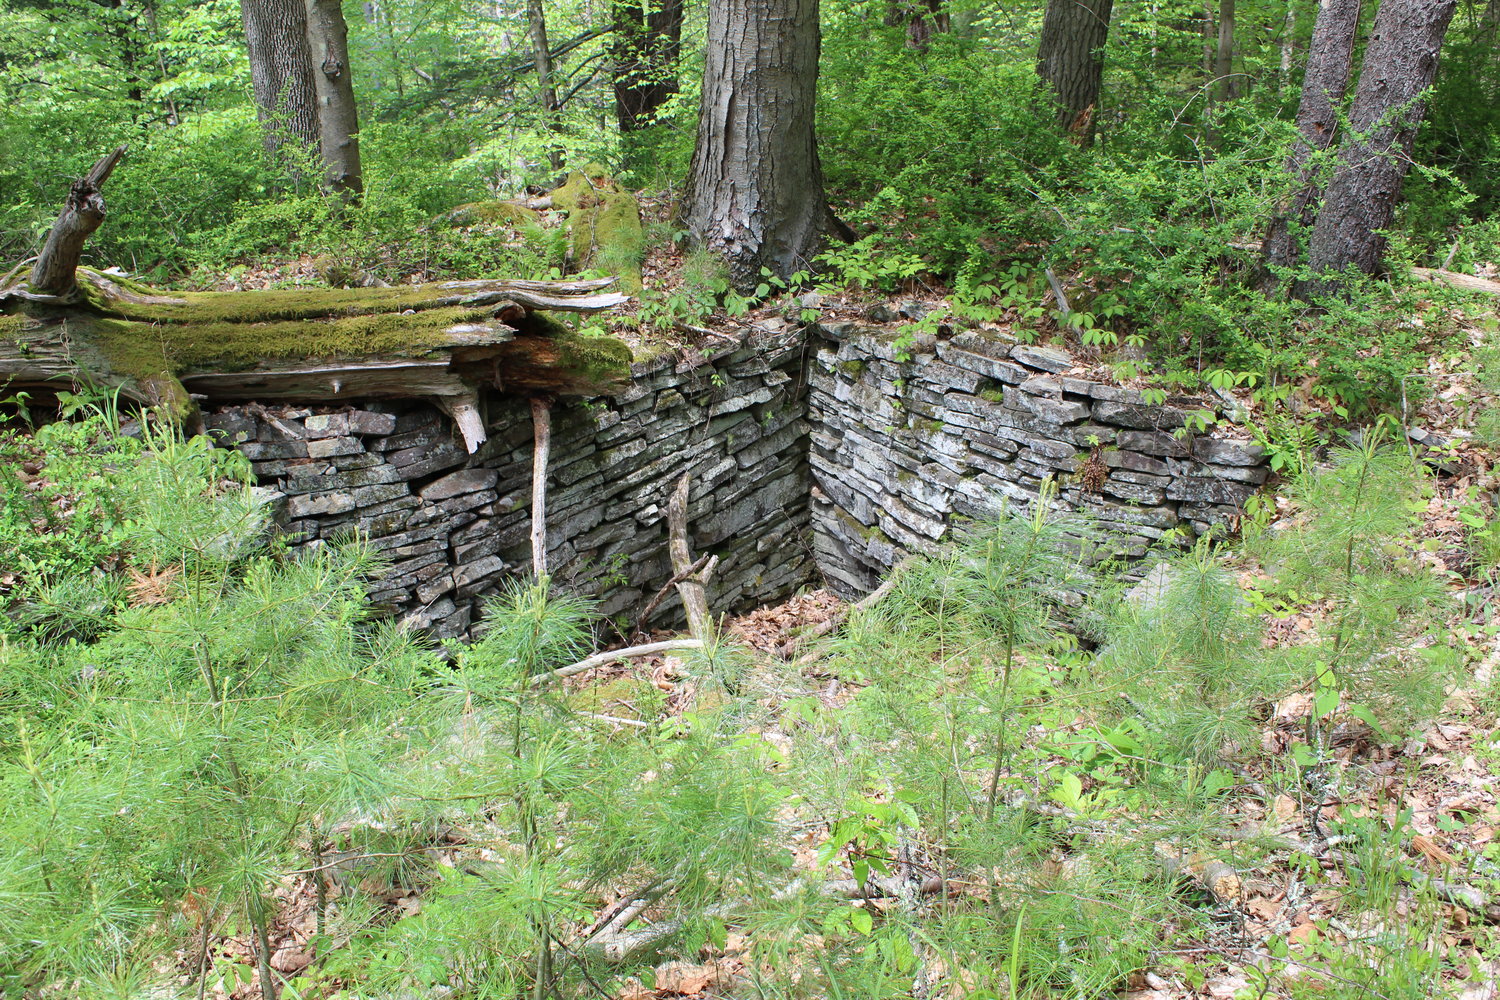 This small stone-lined space might have been a root cellar.